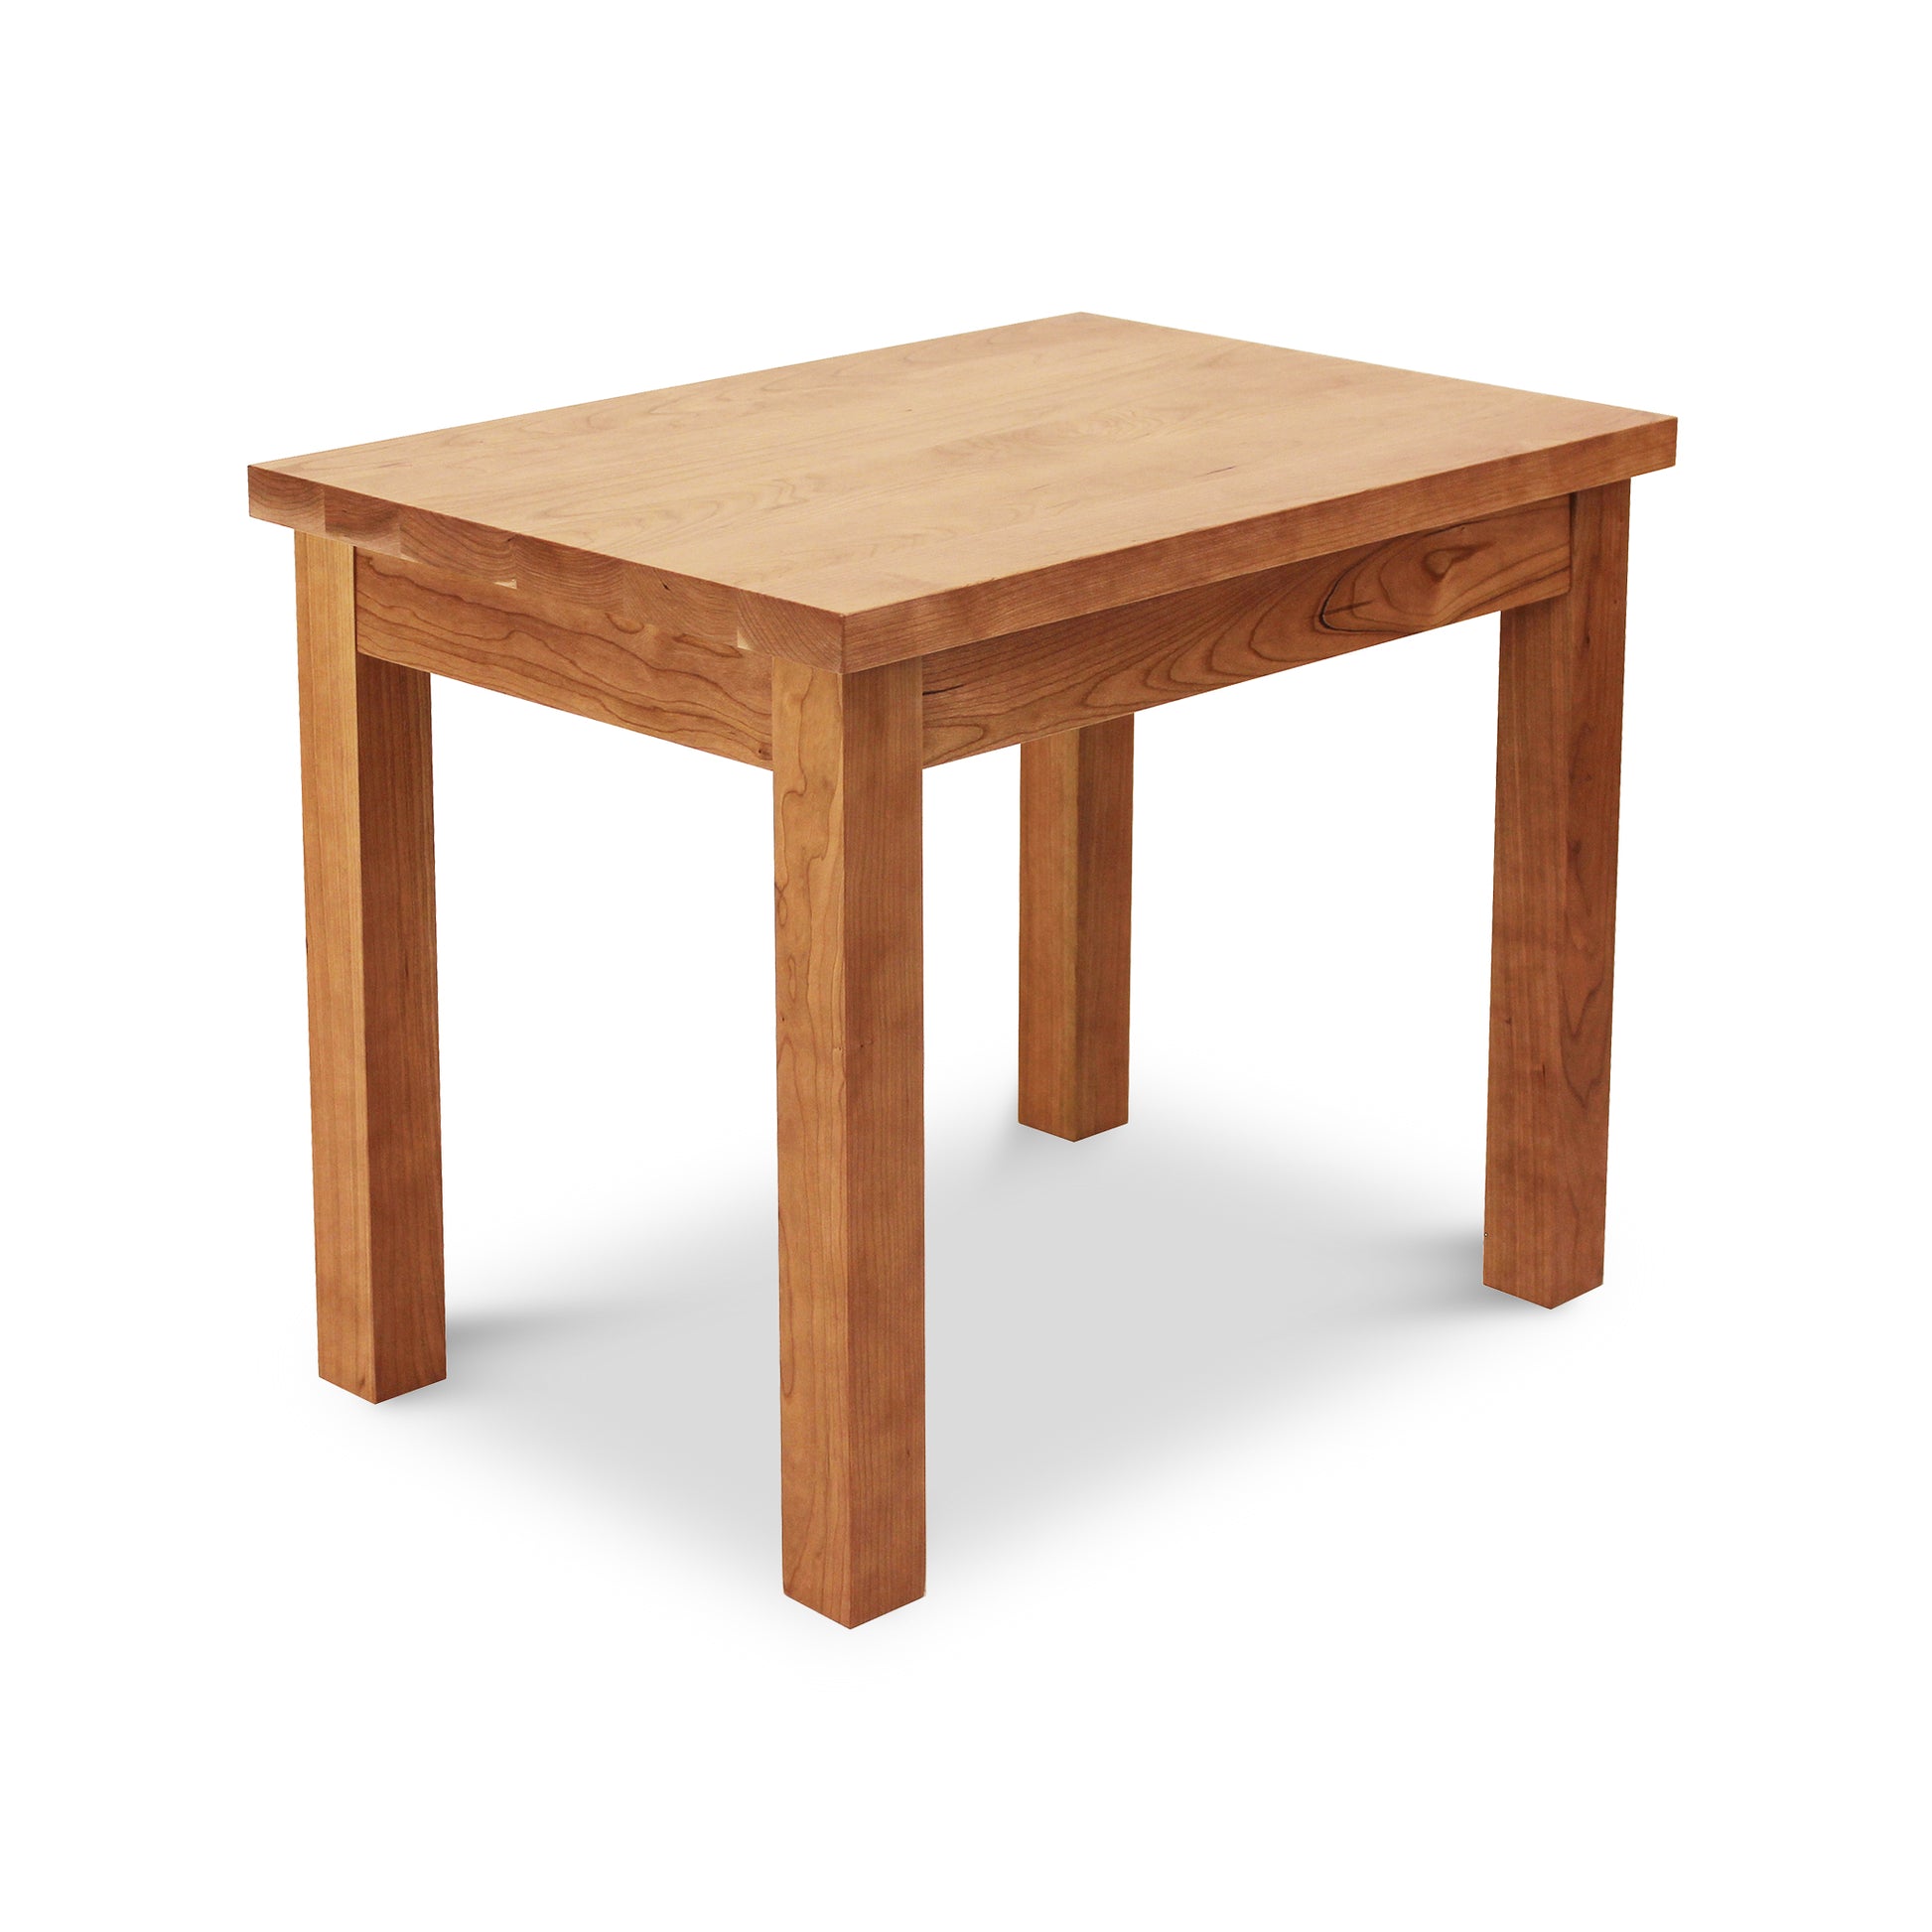 A Modern Mission End Table by Lyndon Furniture on a white background.